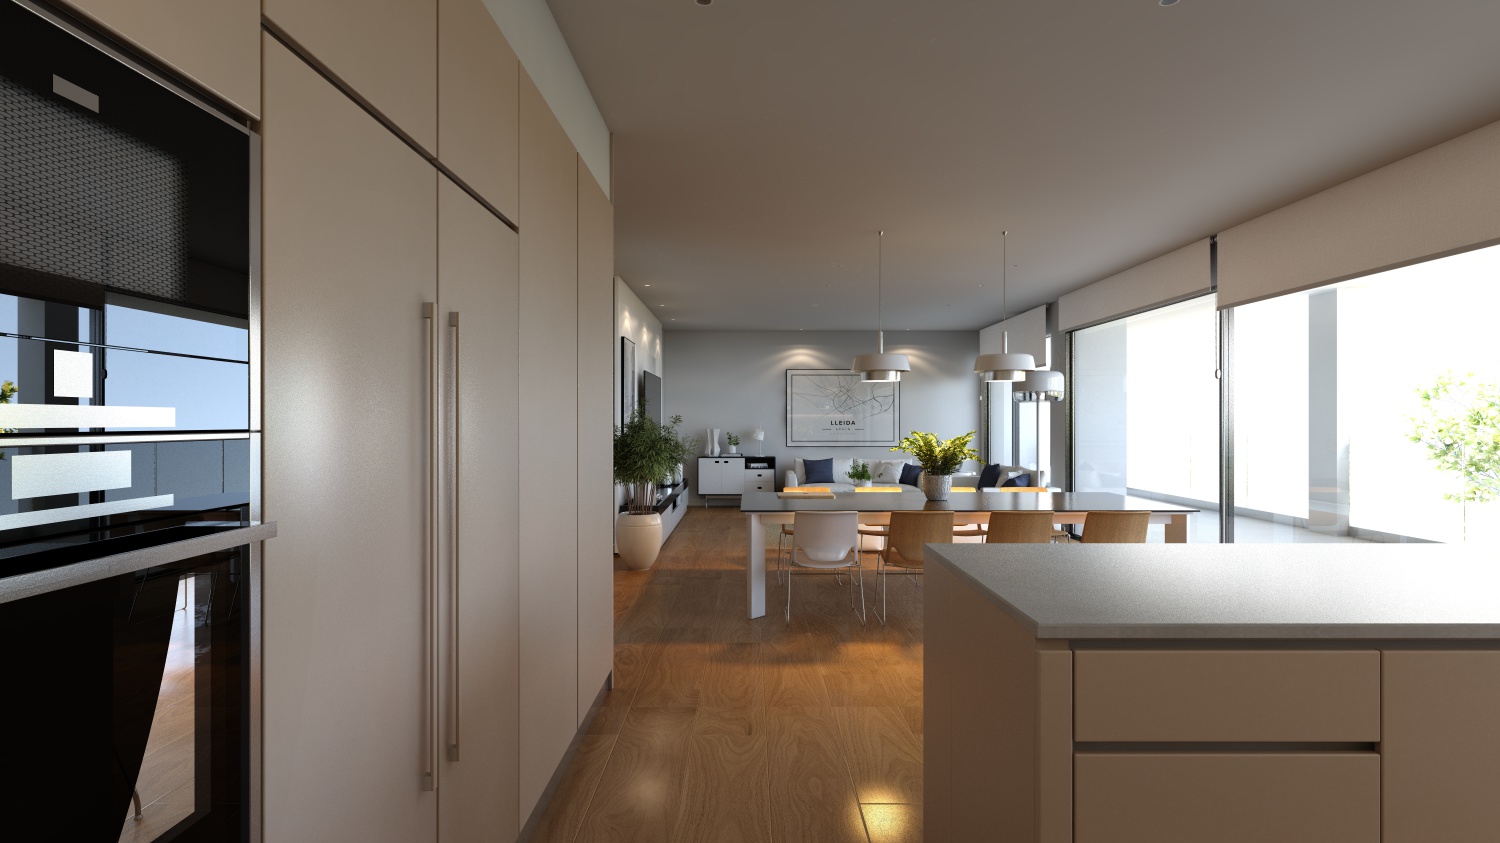 Living room and kitchen render image of a block of flats in Lleida by GAYARRE infografia